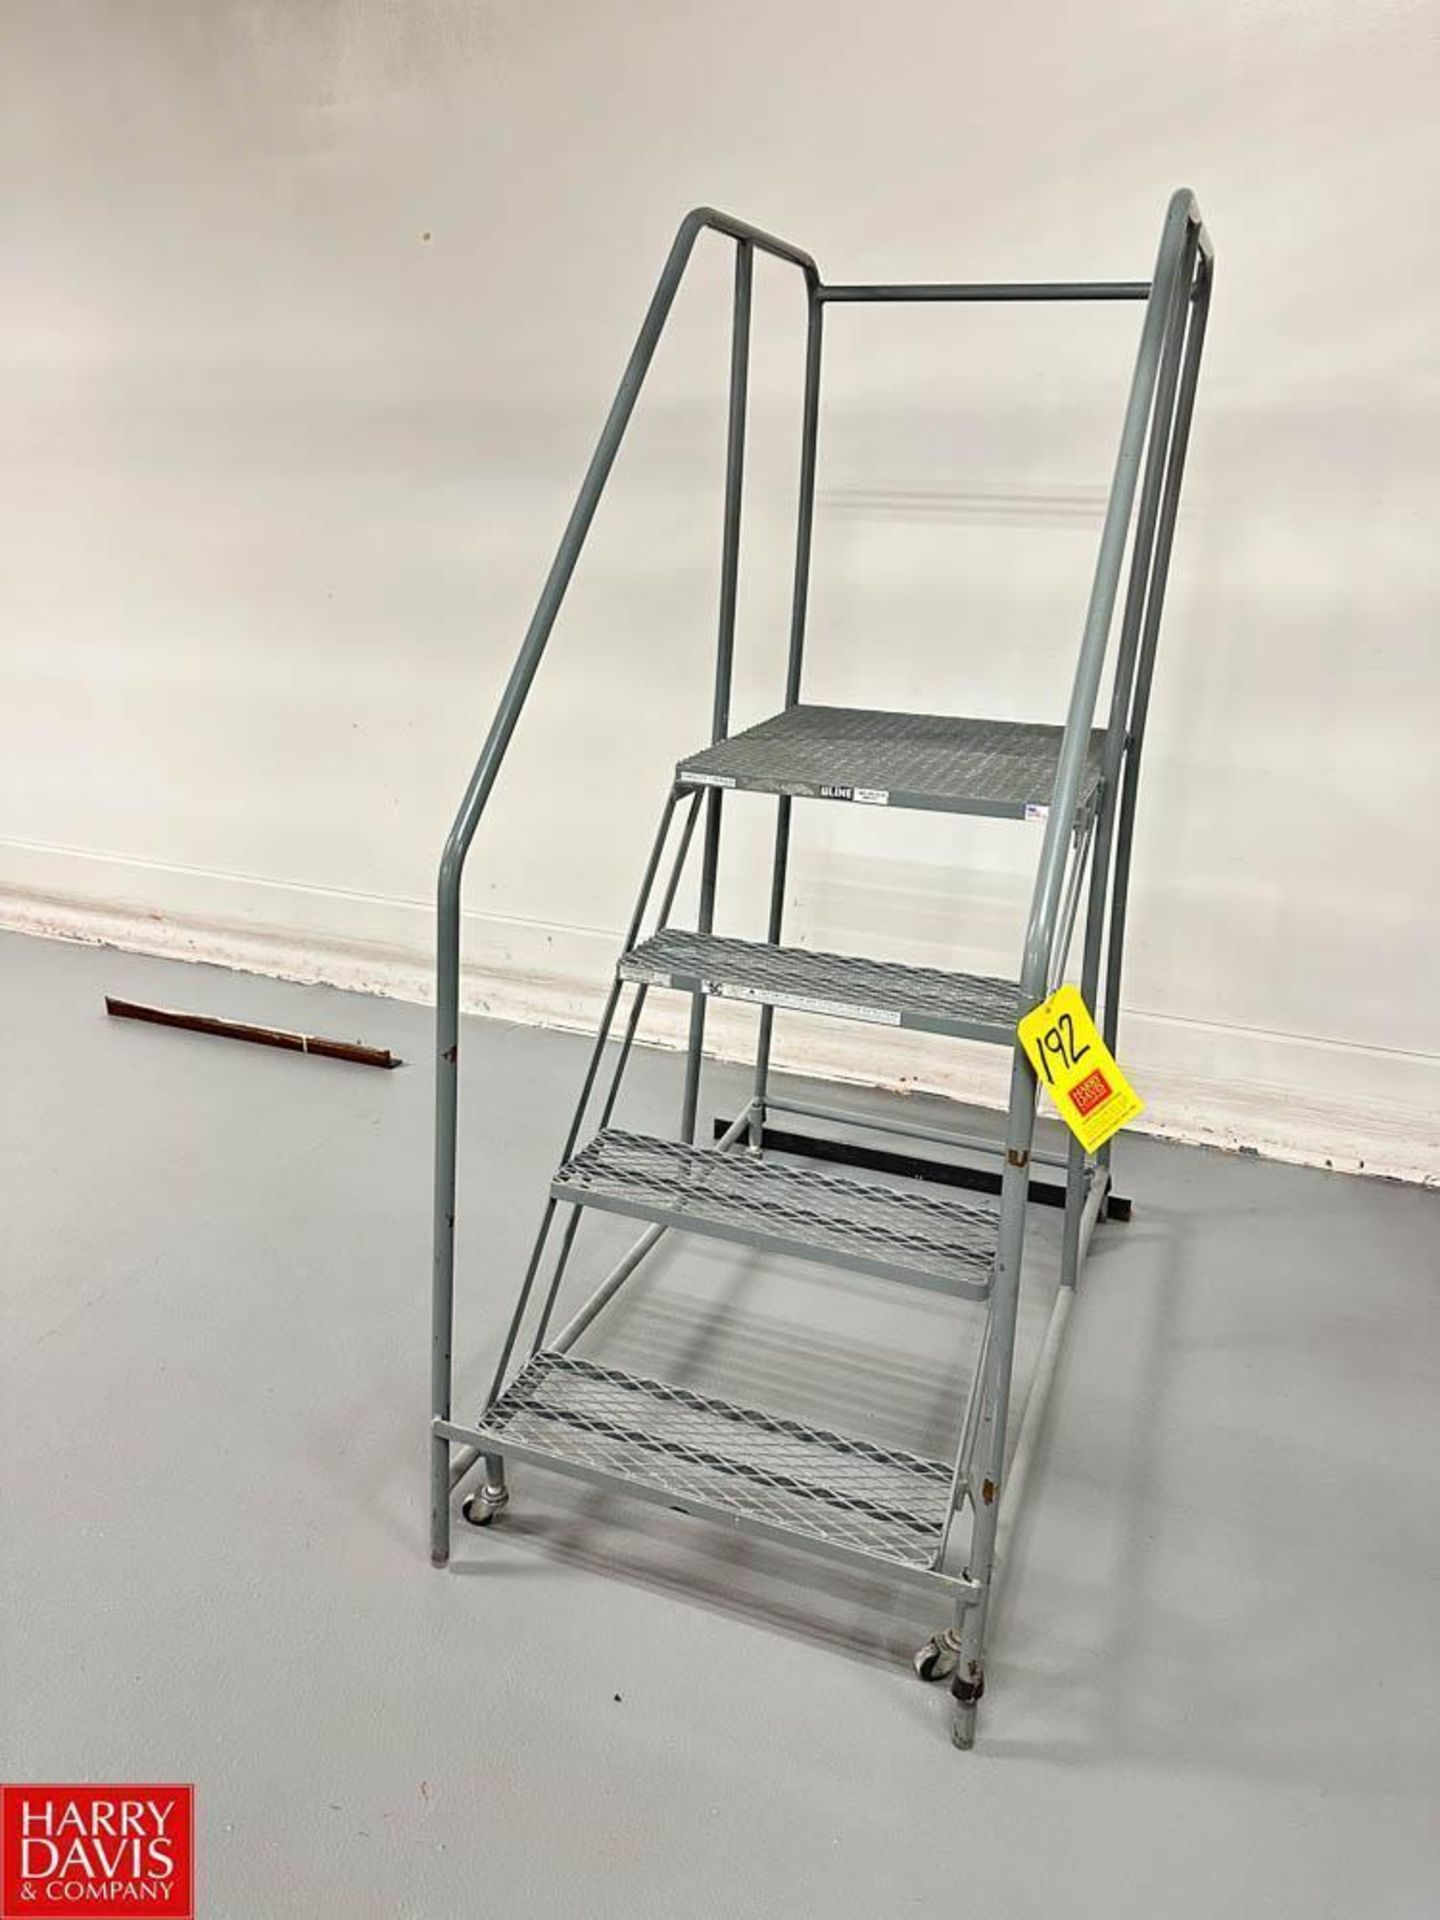 ULINE Portable Stairs - Rigging Fee: $35